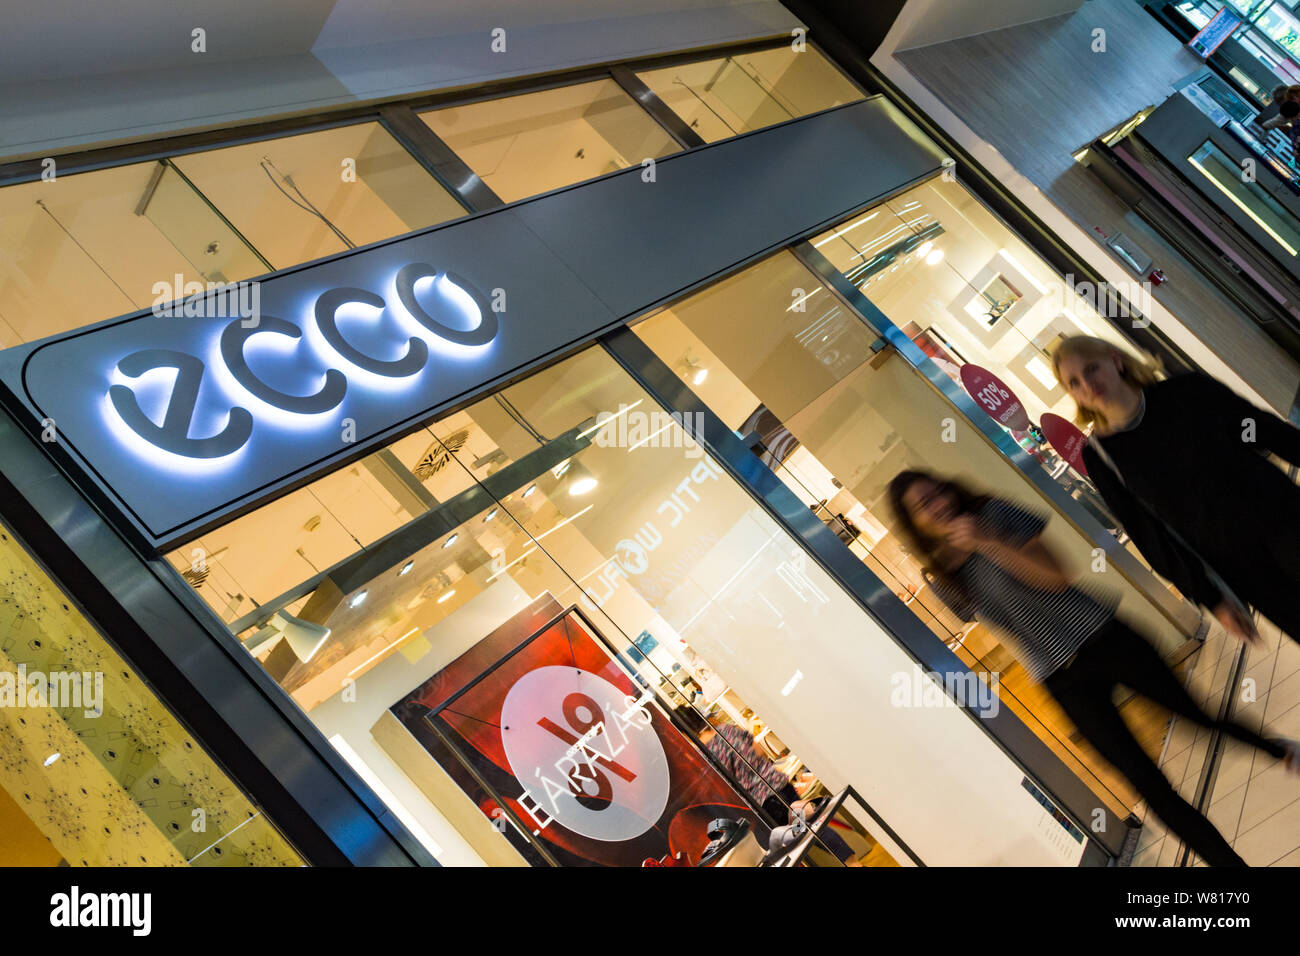 Ecco shop front in Mammut shopping center, Budapest, Hungary Stock Photo -  Alamy